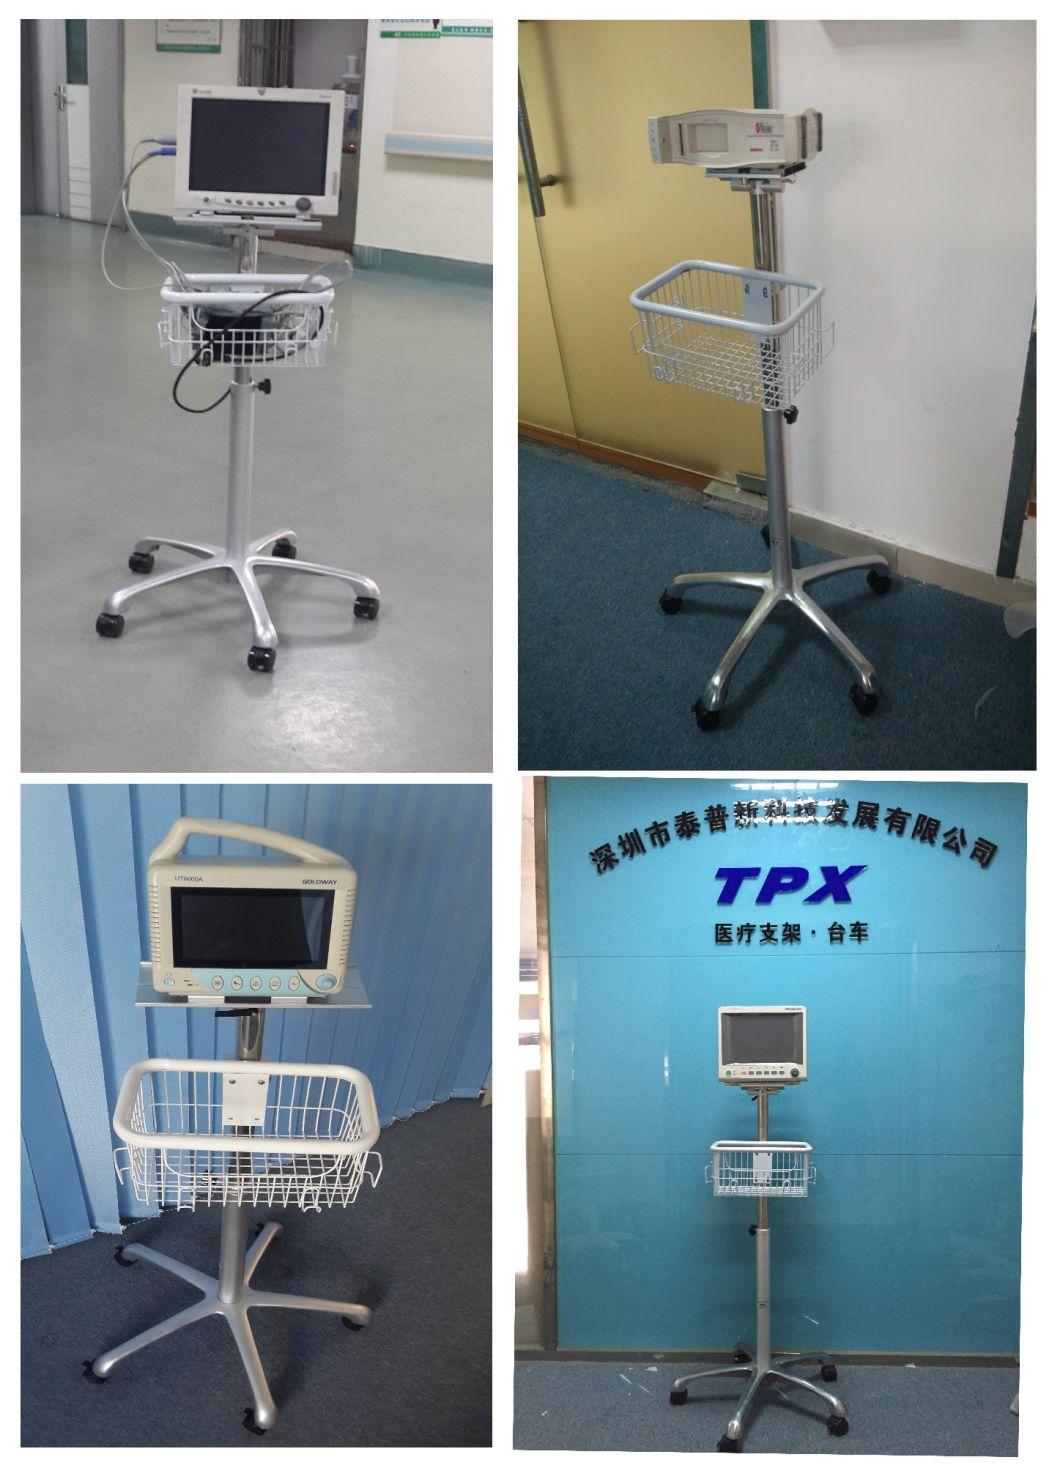 Cheapest Patient Monitor Stand Patient Monitor Trolley